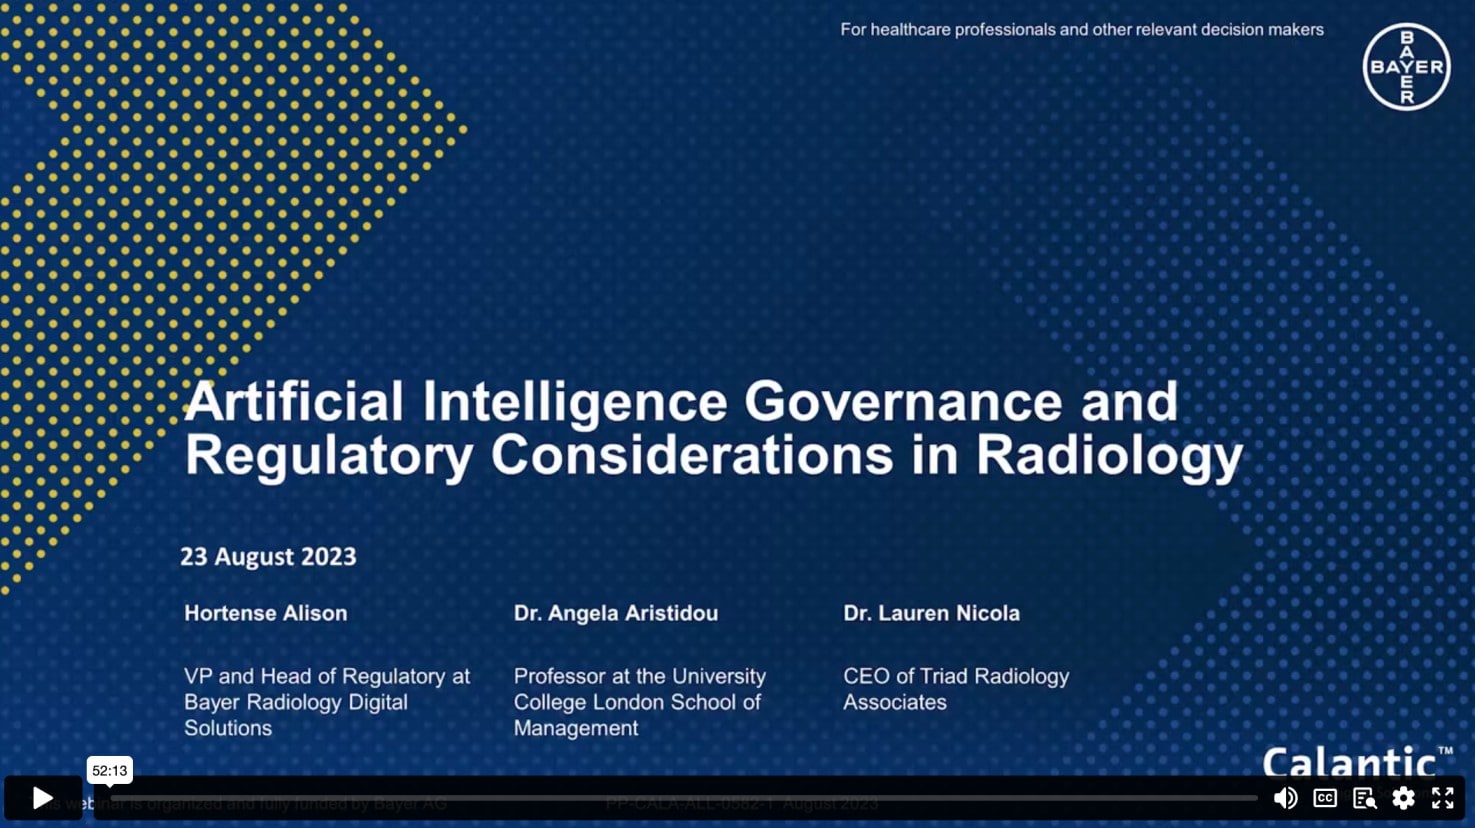 Artificial Intelligence Governance in Radiology and the Considerations for Regulation